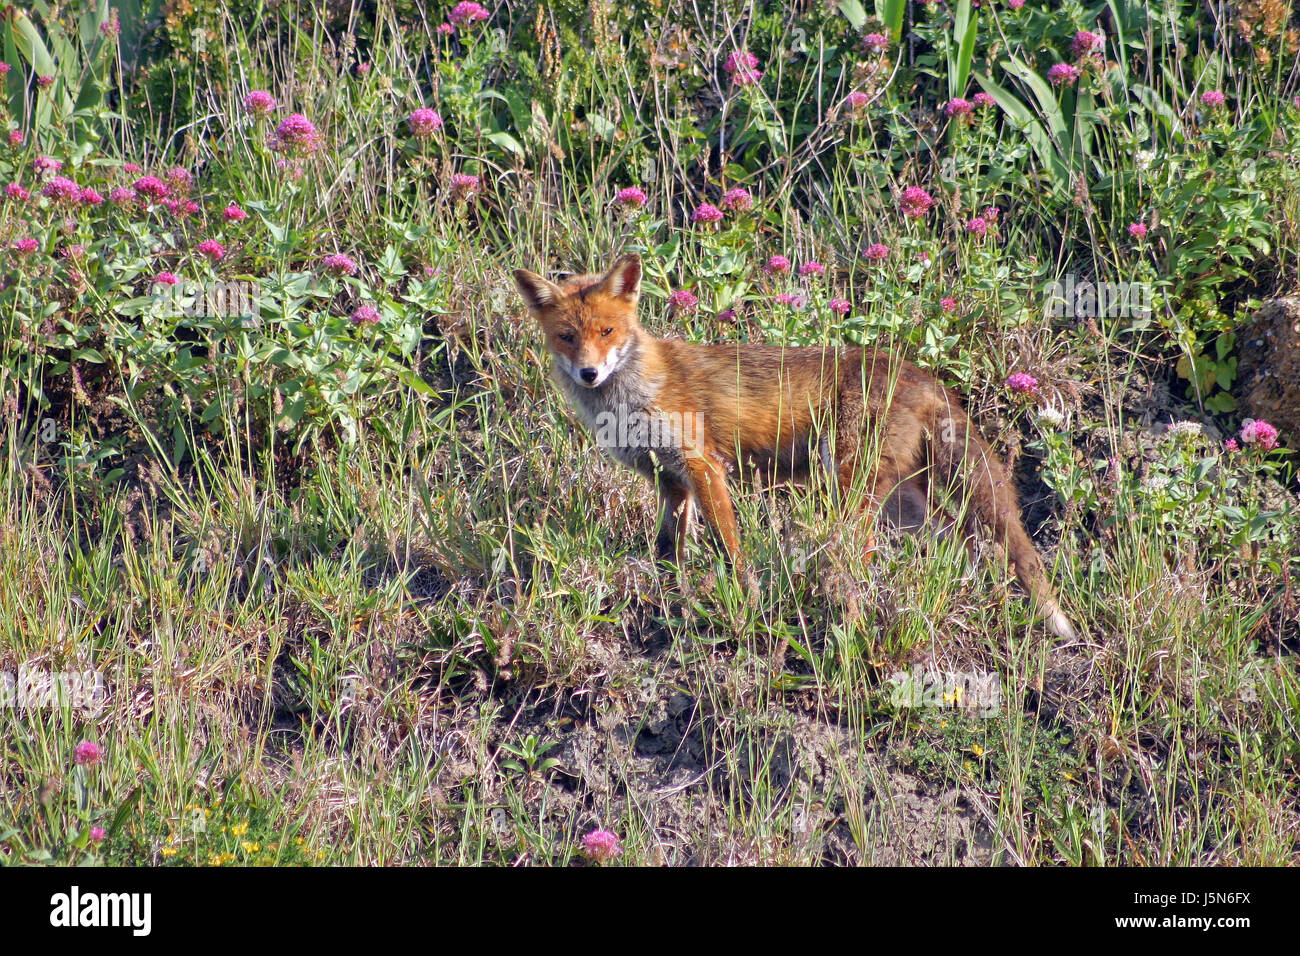 A picture or image showing a wild fox against a foliage background. Stock Photo